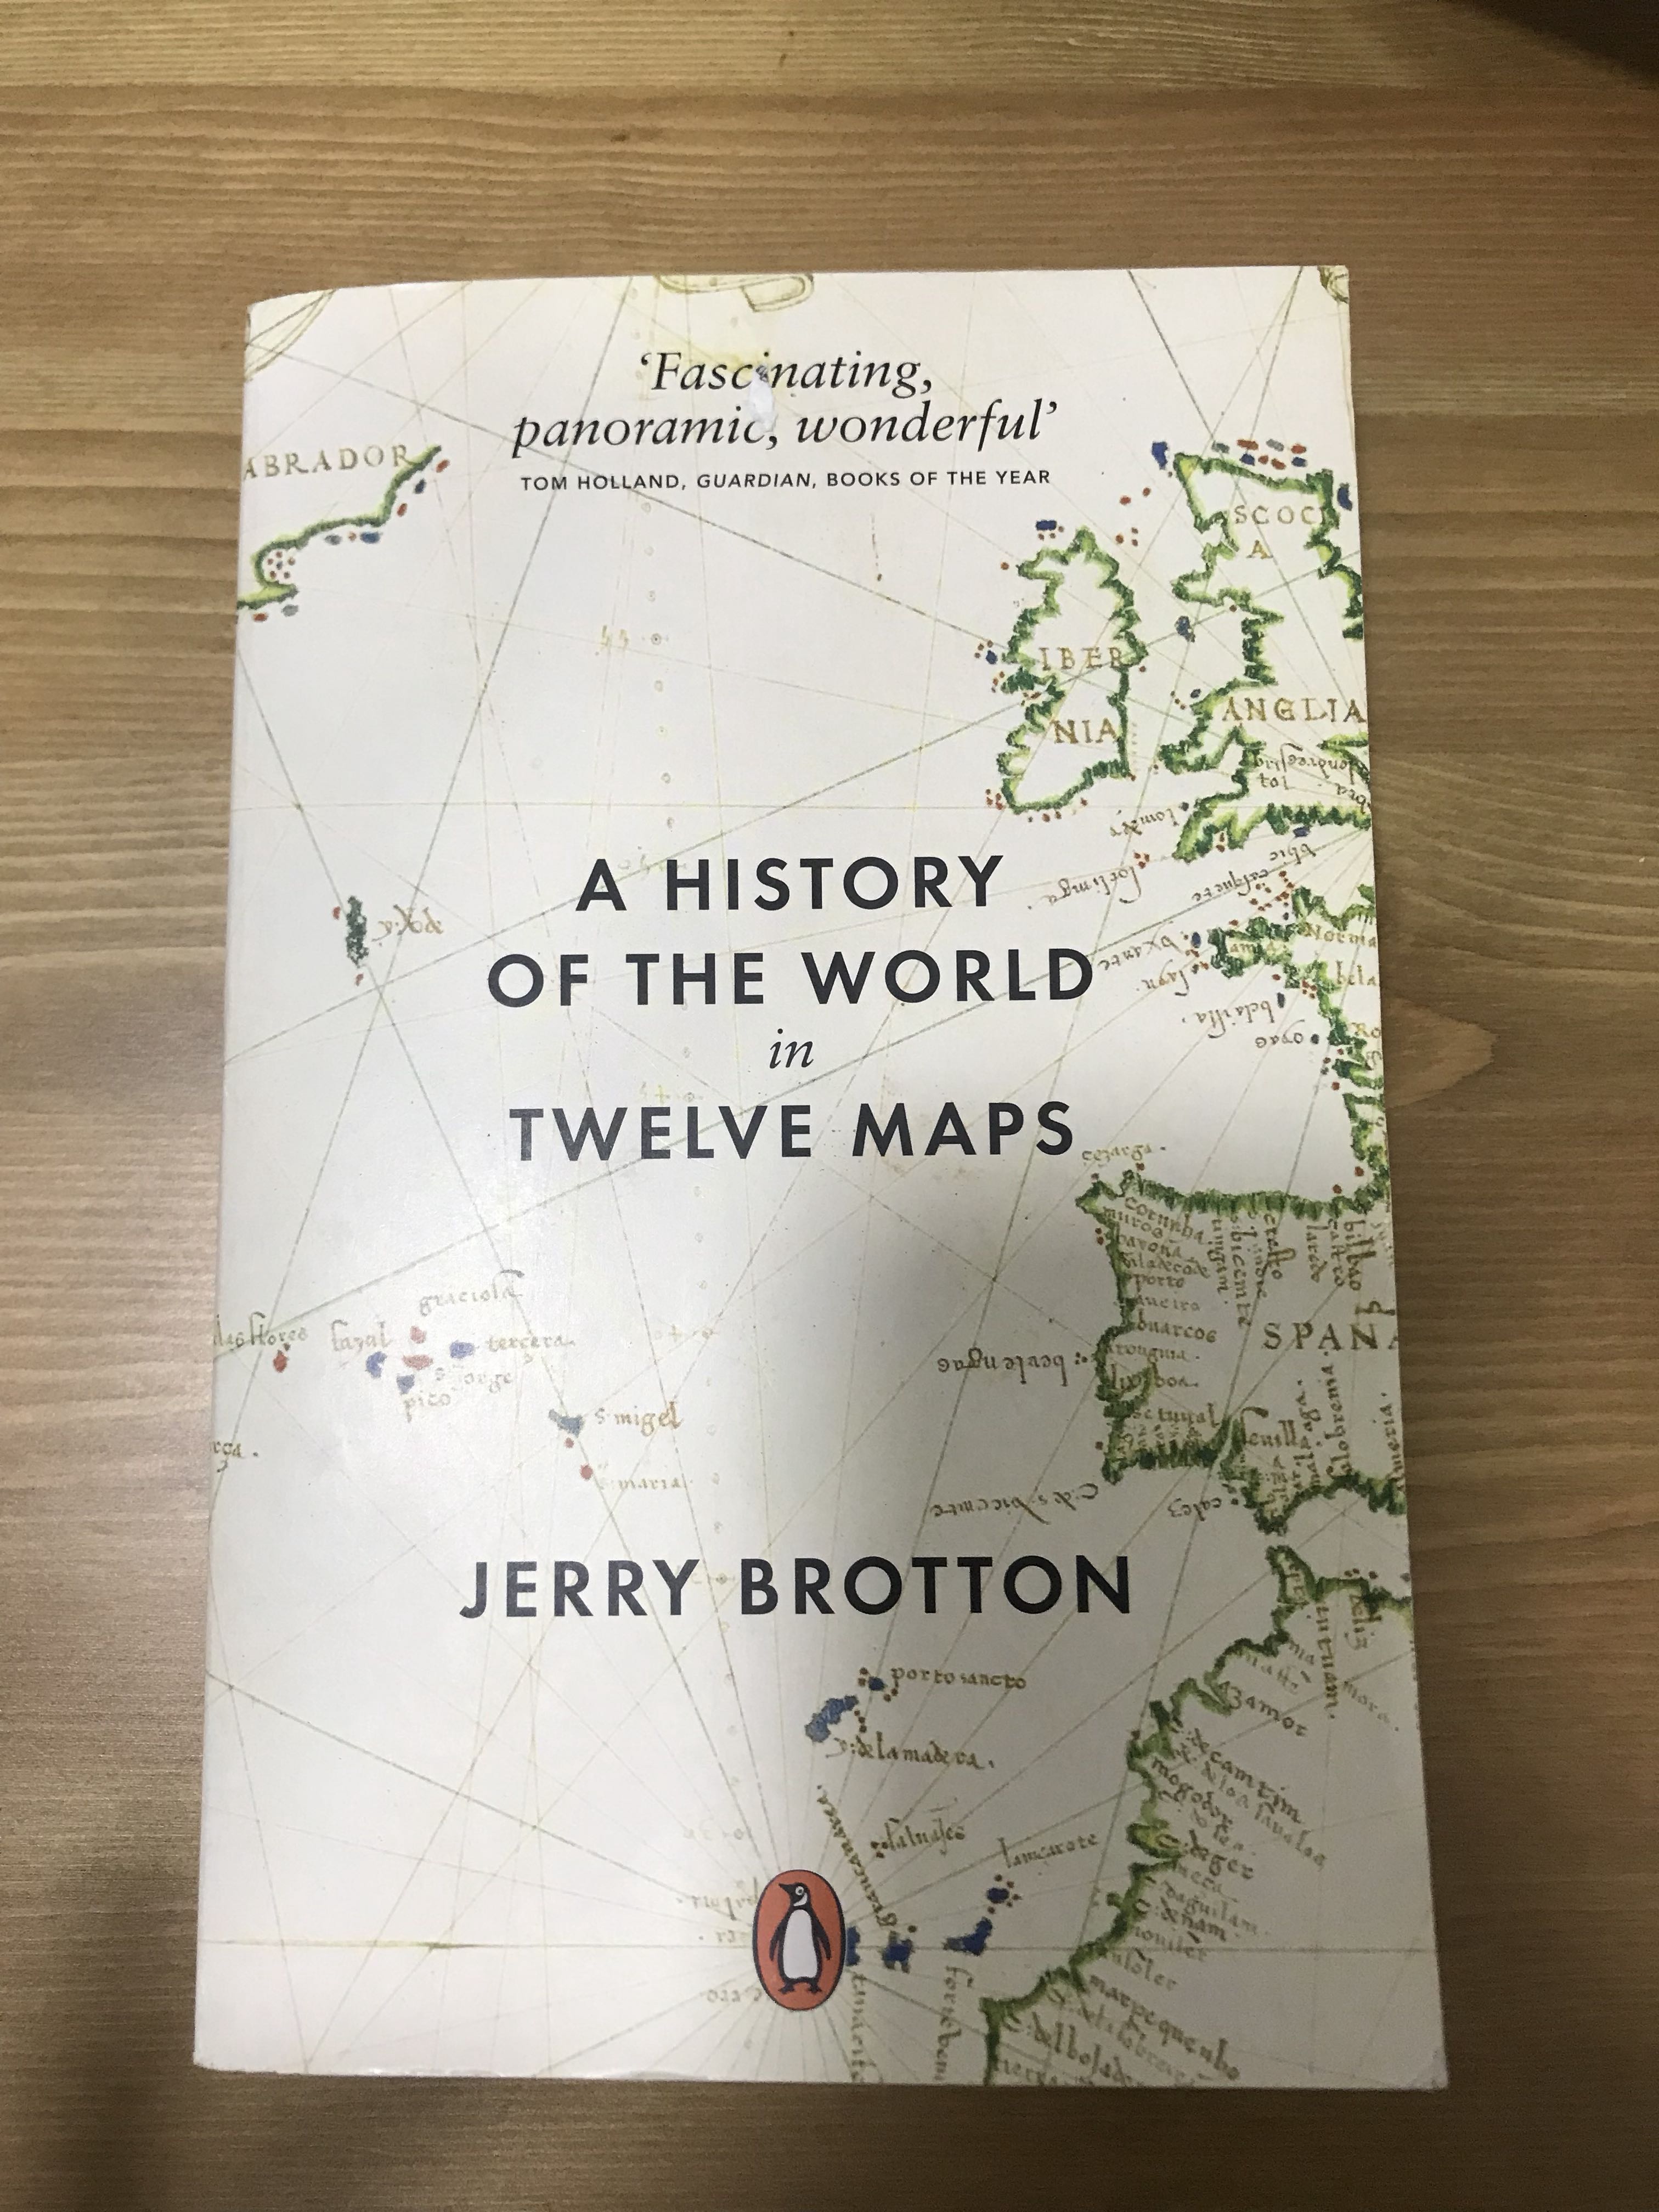  A History of the World in 12 Maps: 9780143126027